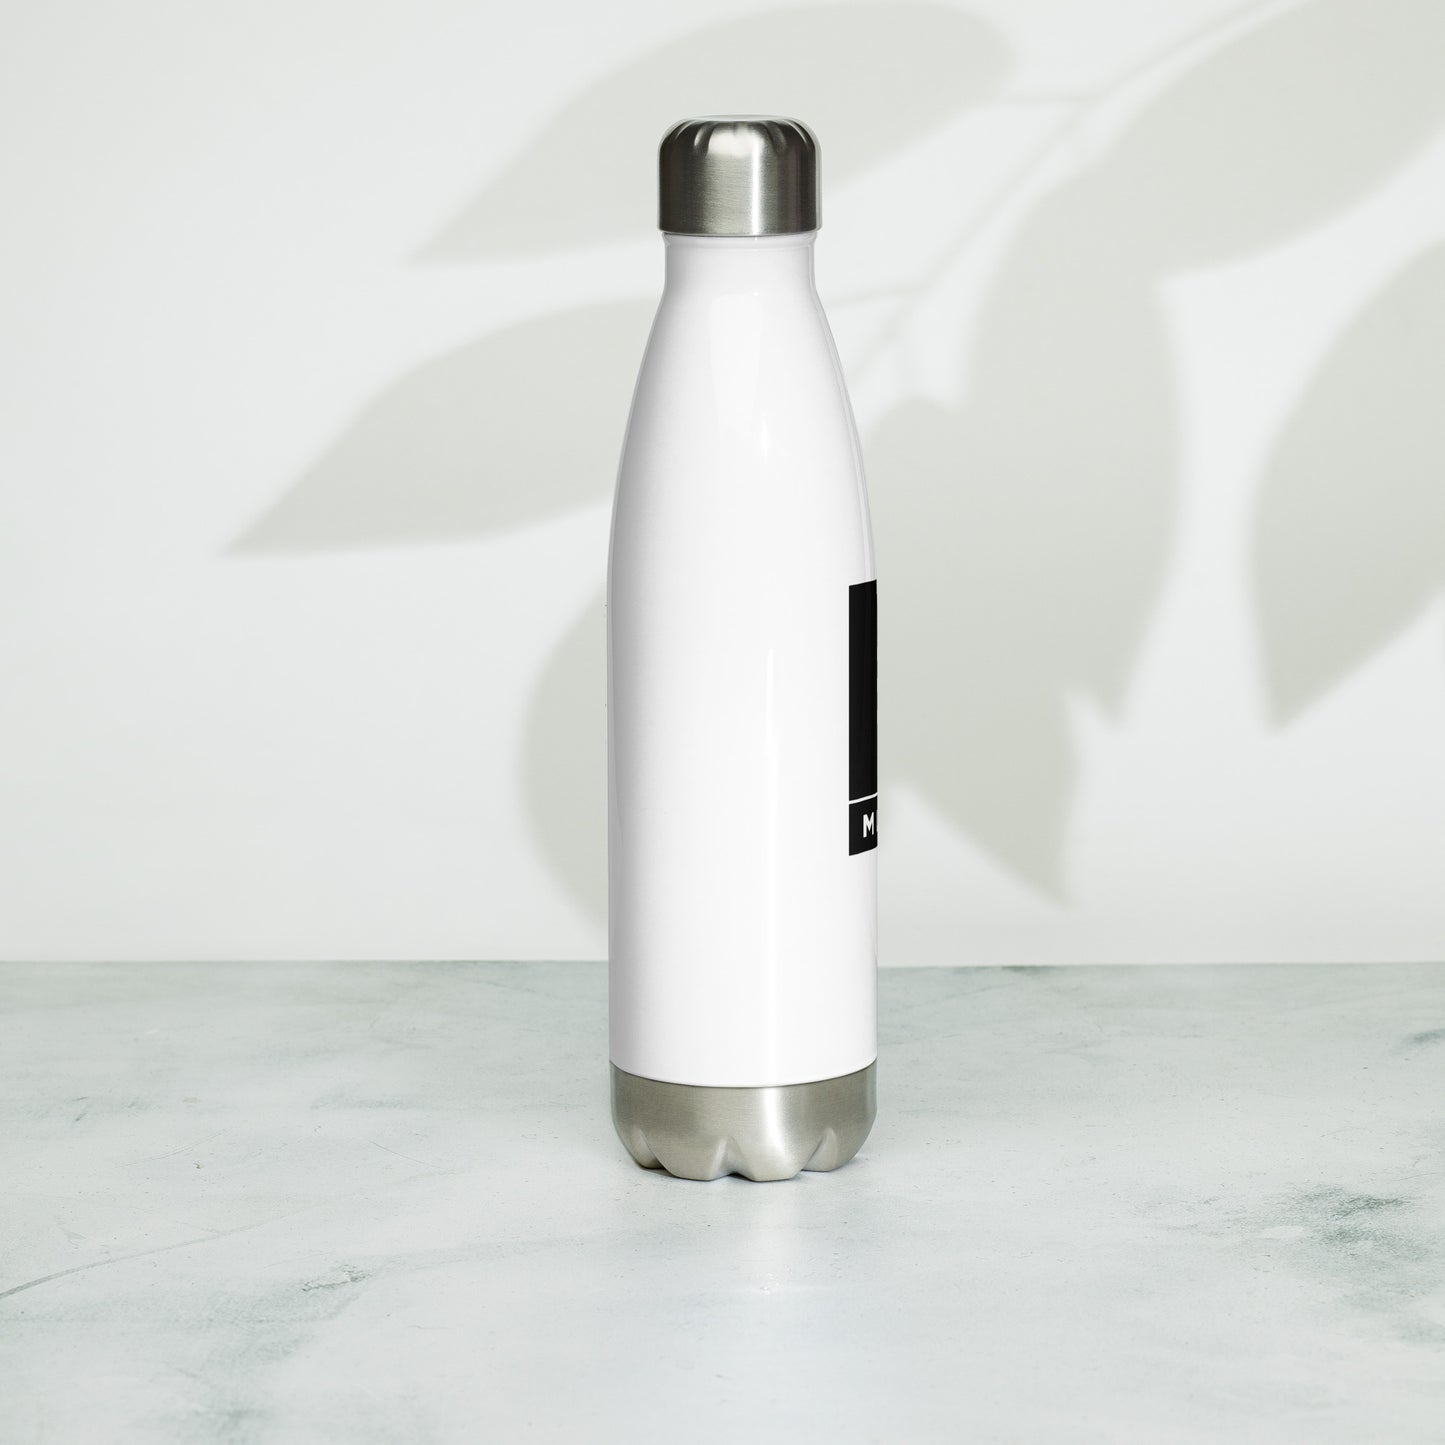 MLFB Stainless Steel Water Bottle